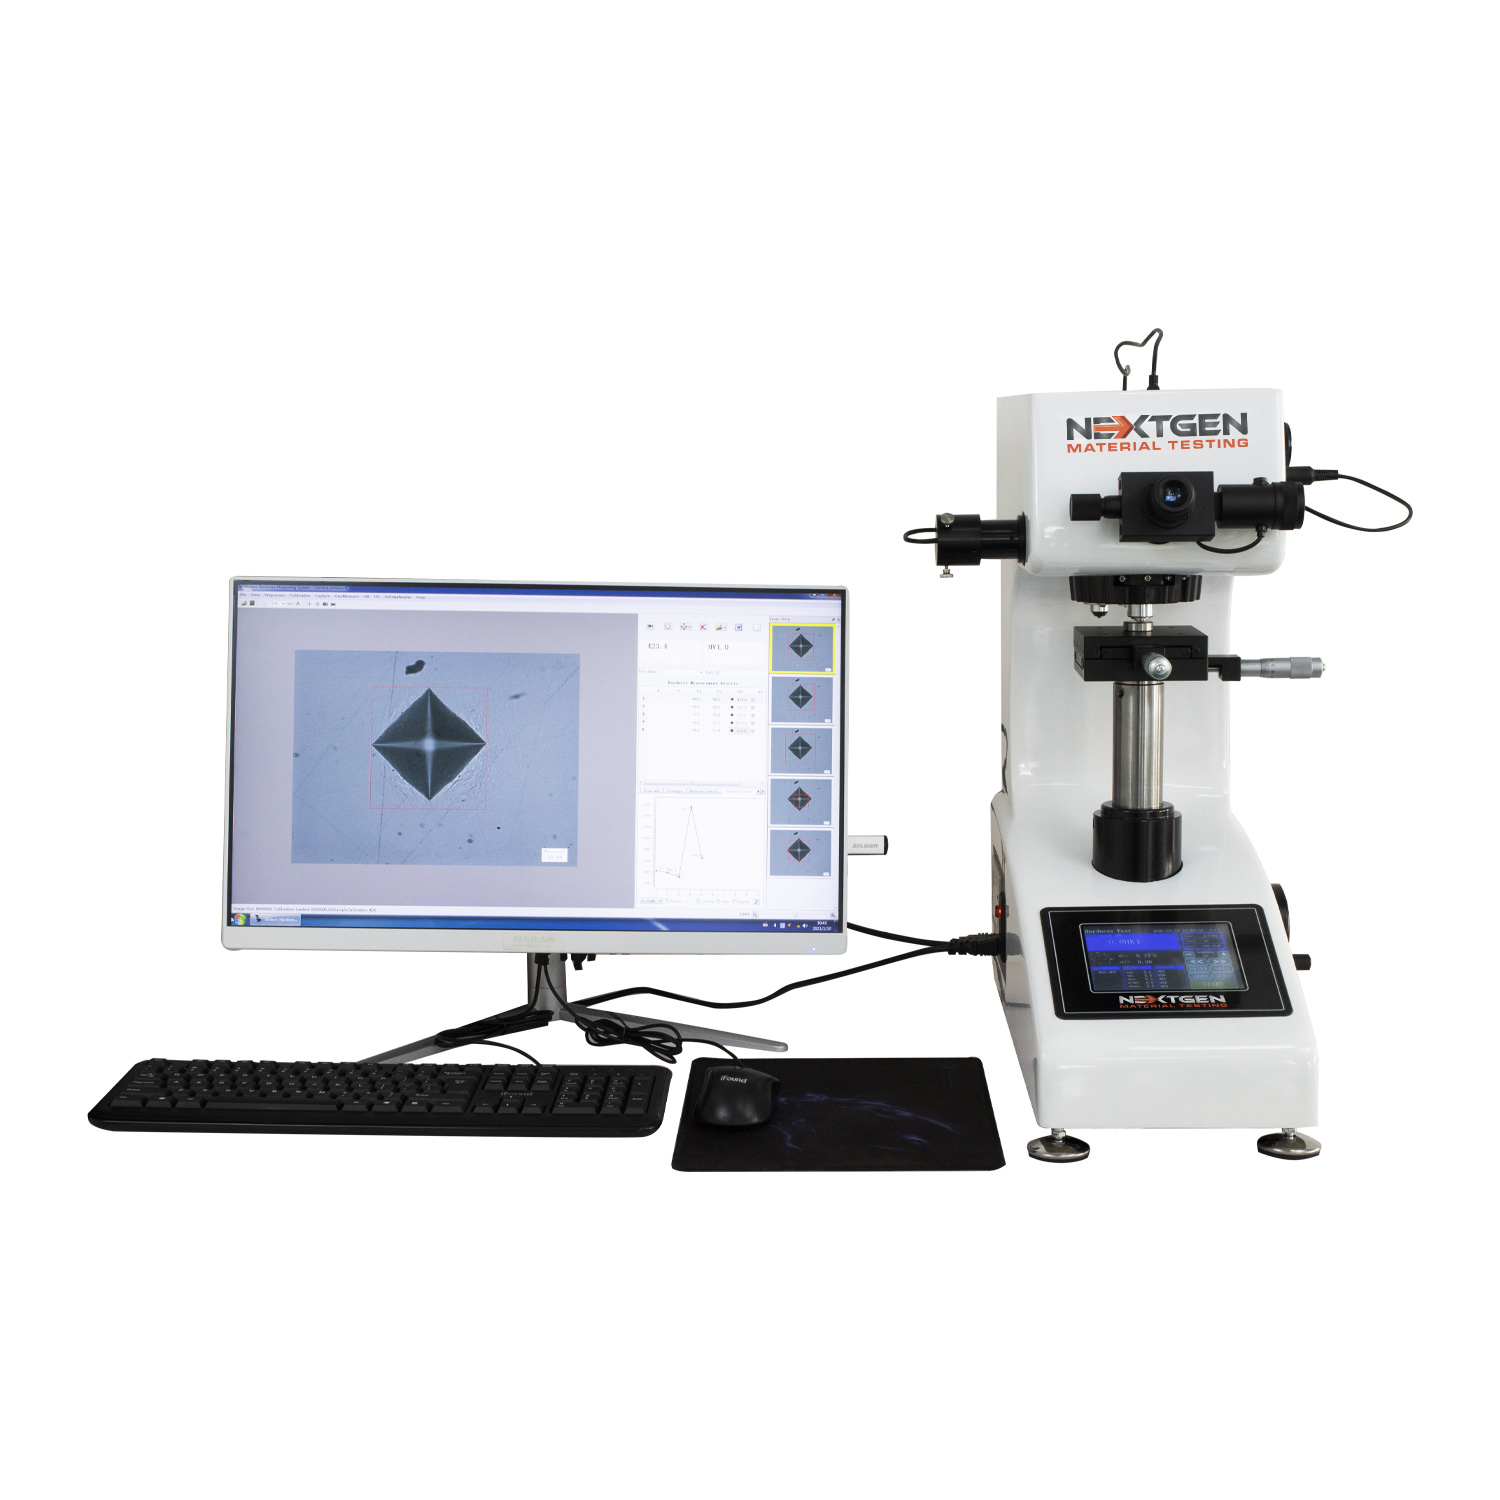 Macro Vickers Hardness Tester - Analogue, Digital and Digital with CCD Optical Analysis Software